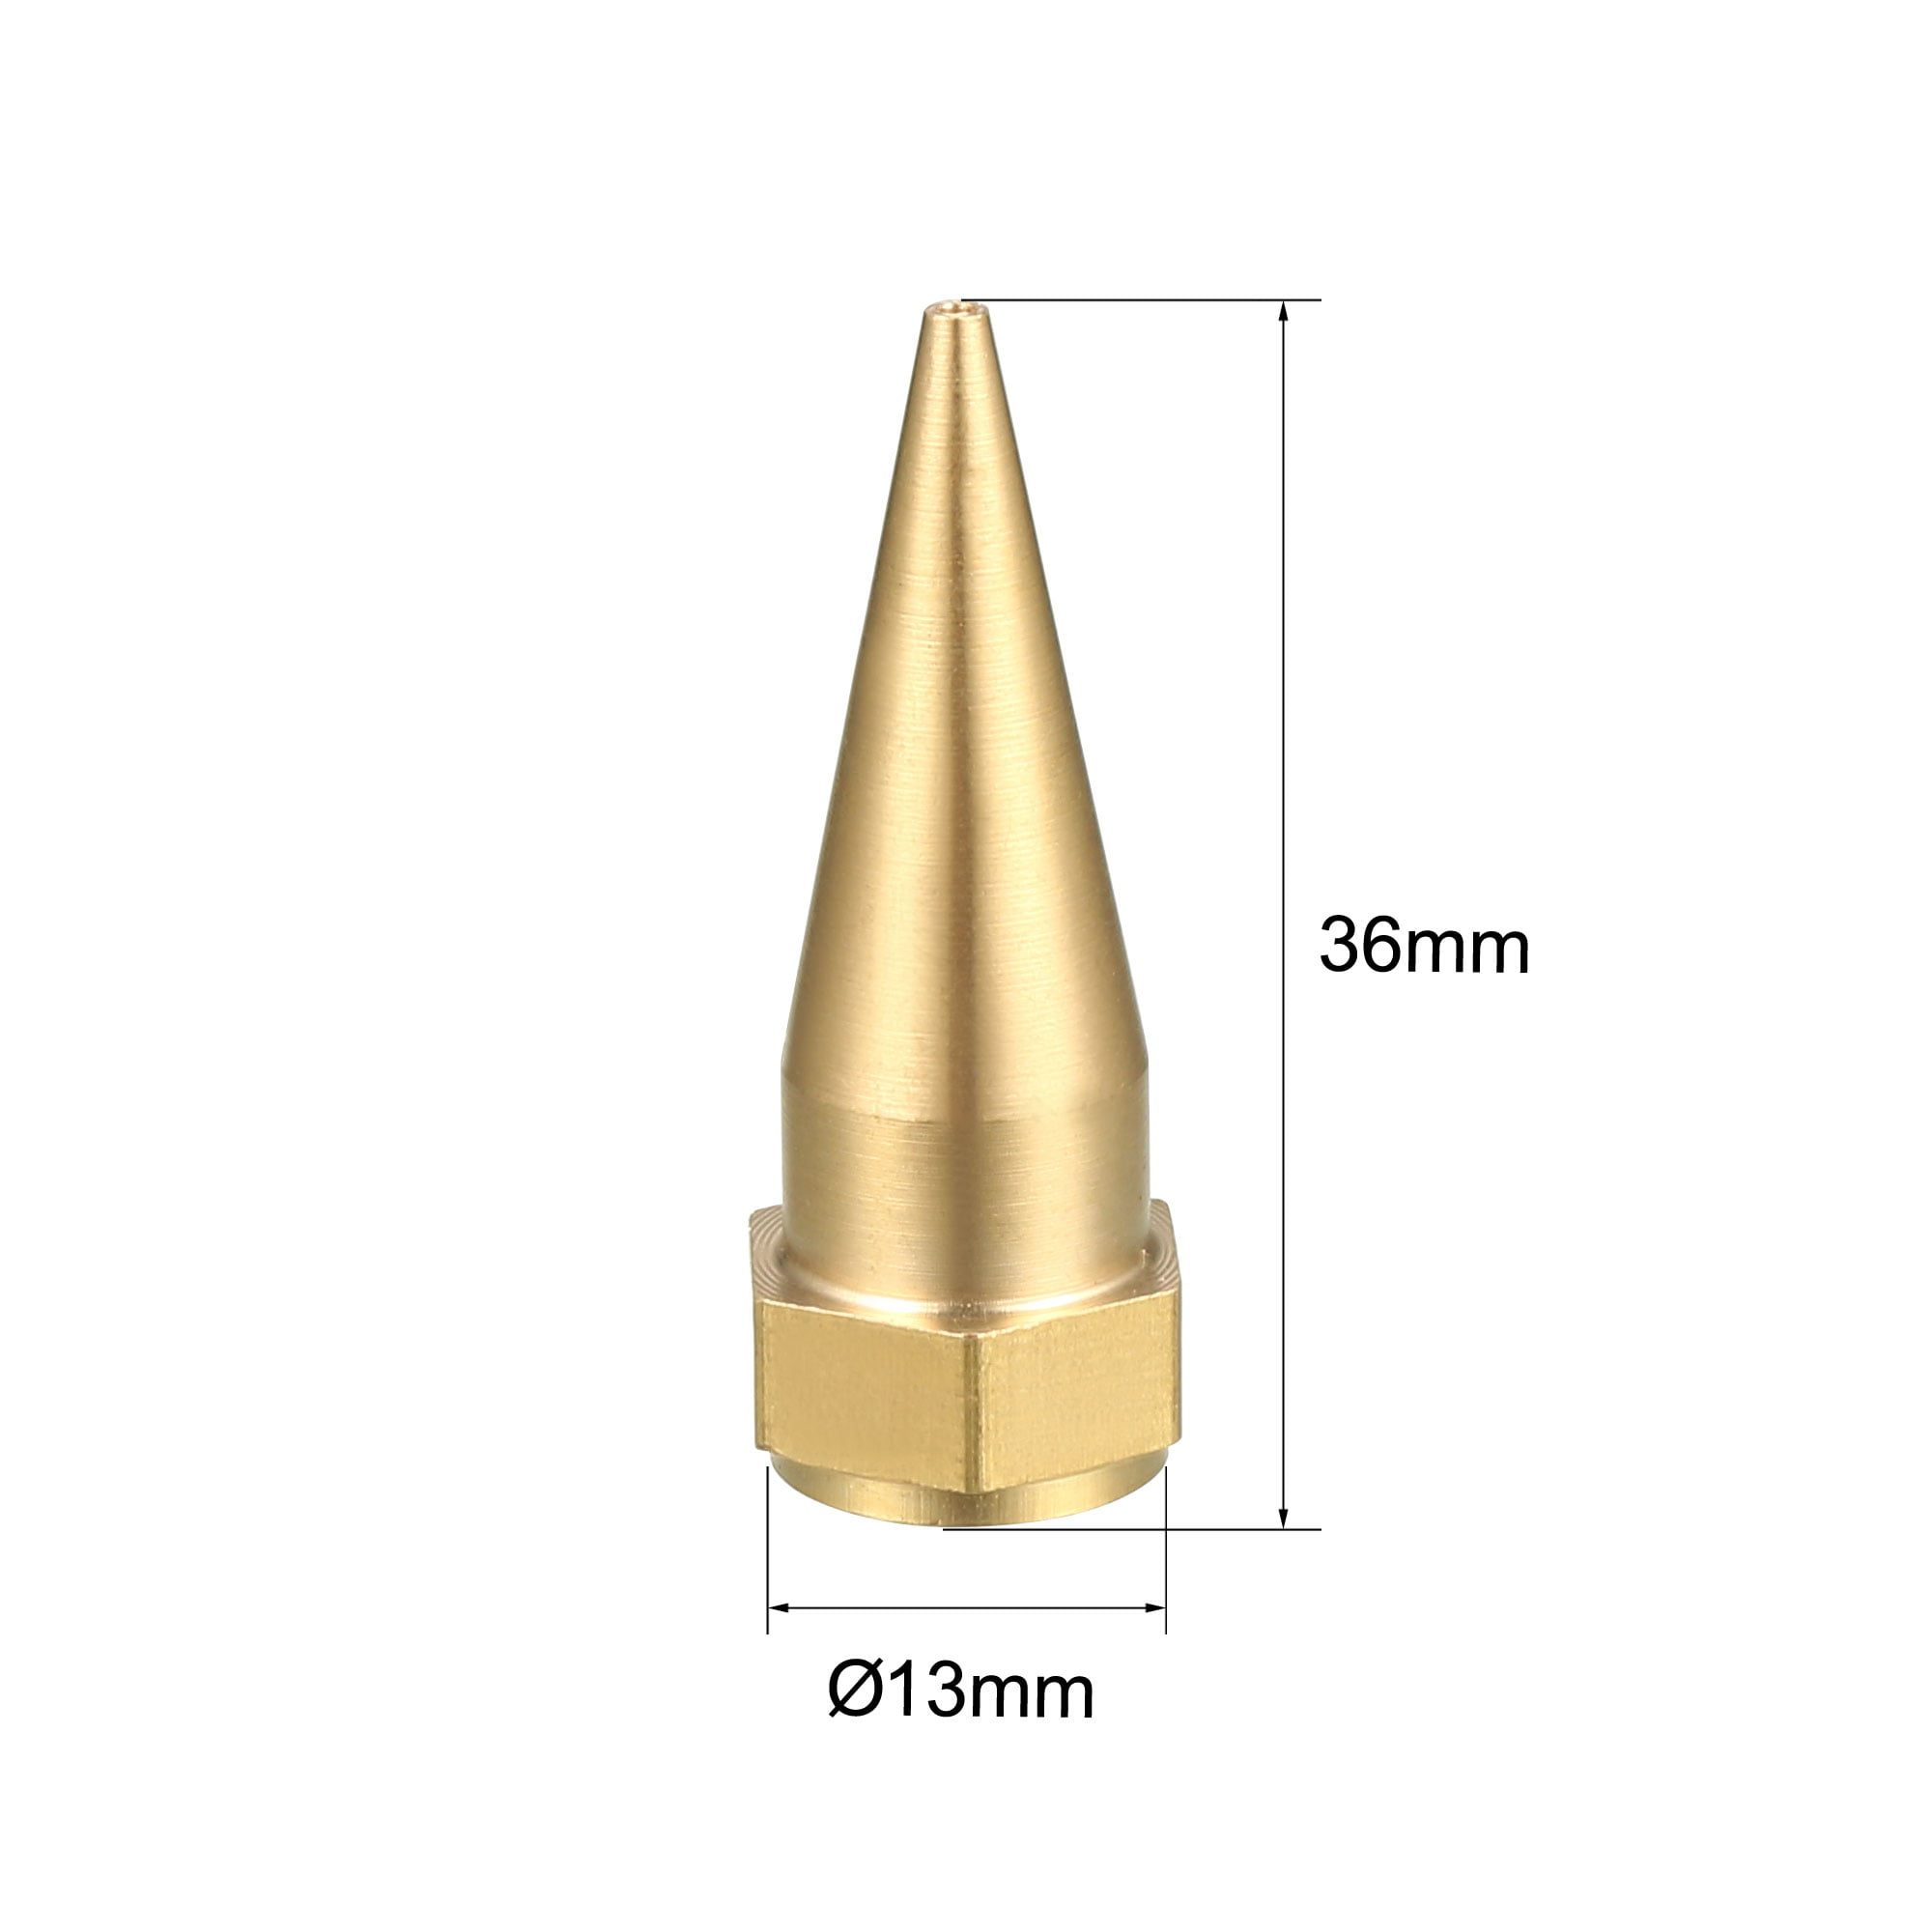 1/8" NPT Grease Fitting Standard Grease Sharp Type Nozzle Gold Tone 1pcs 